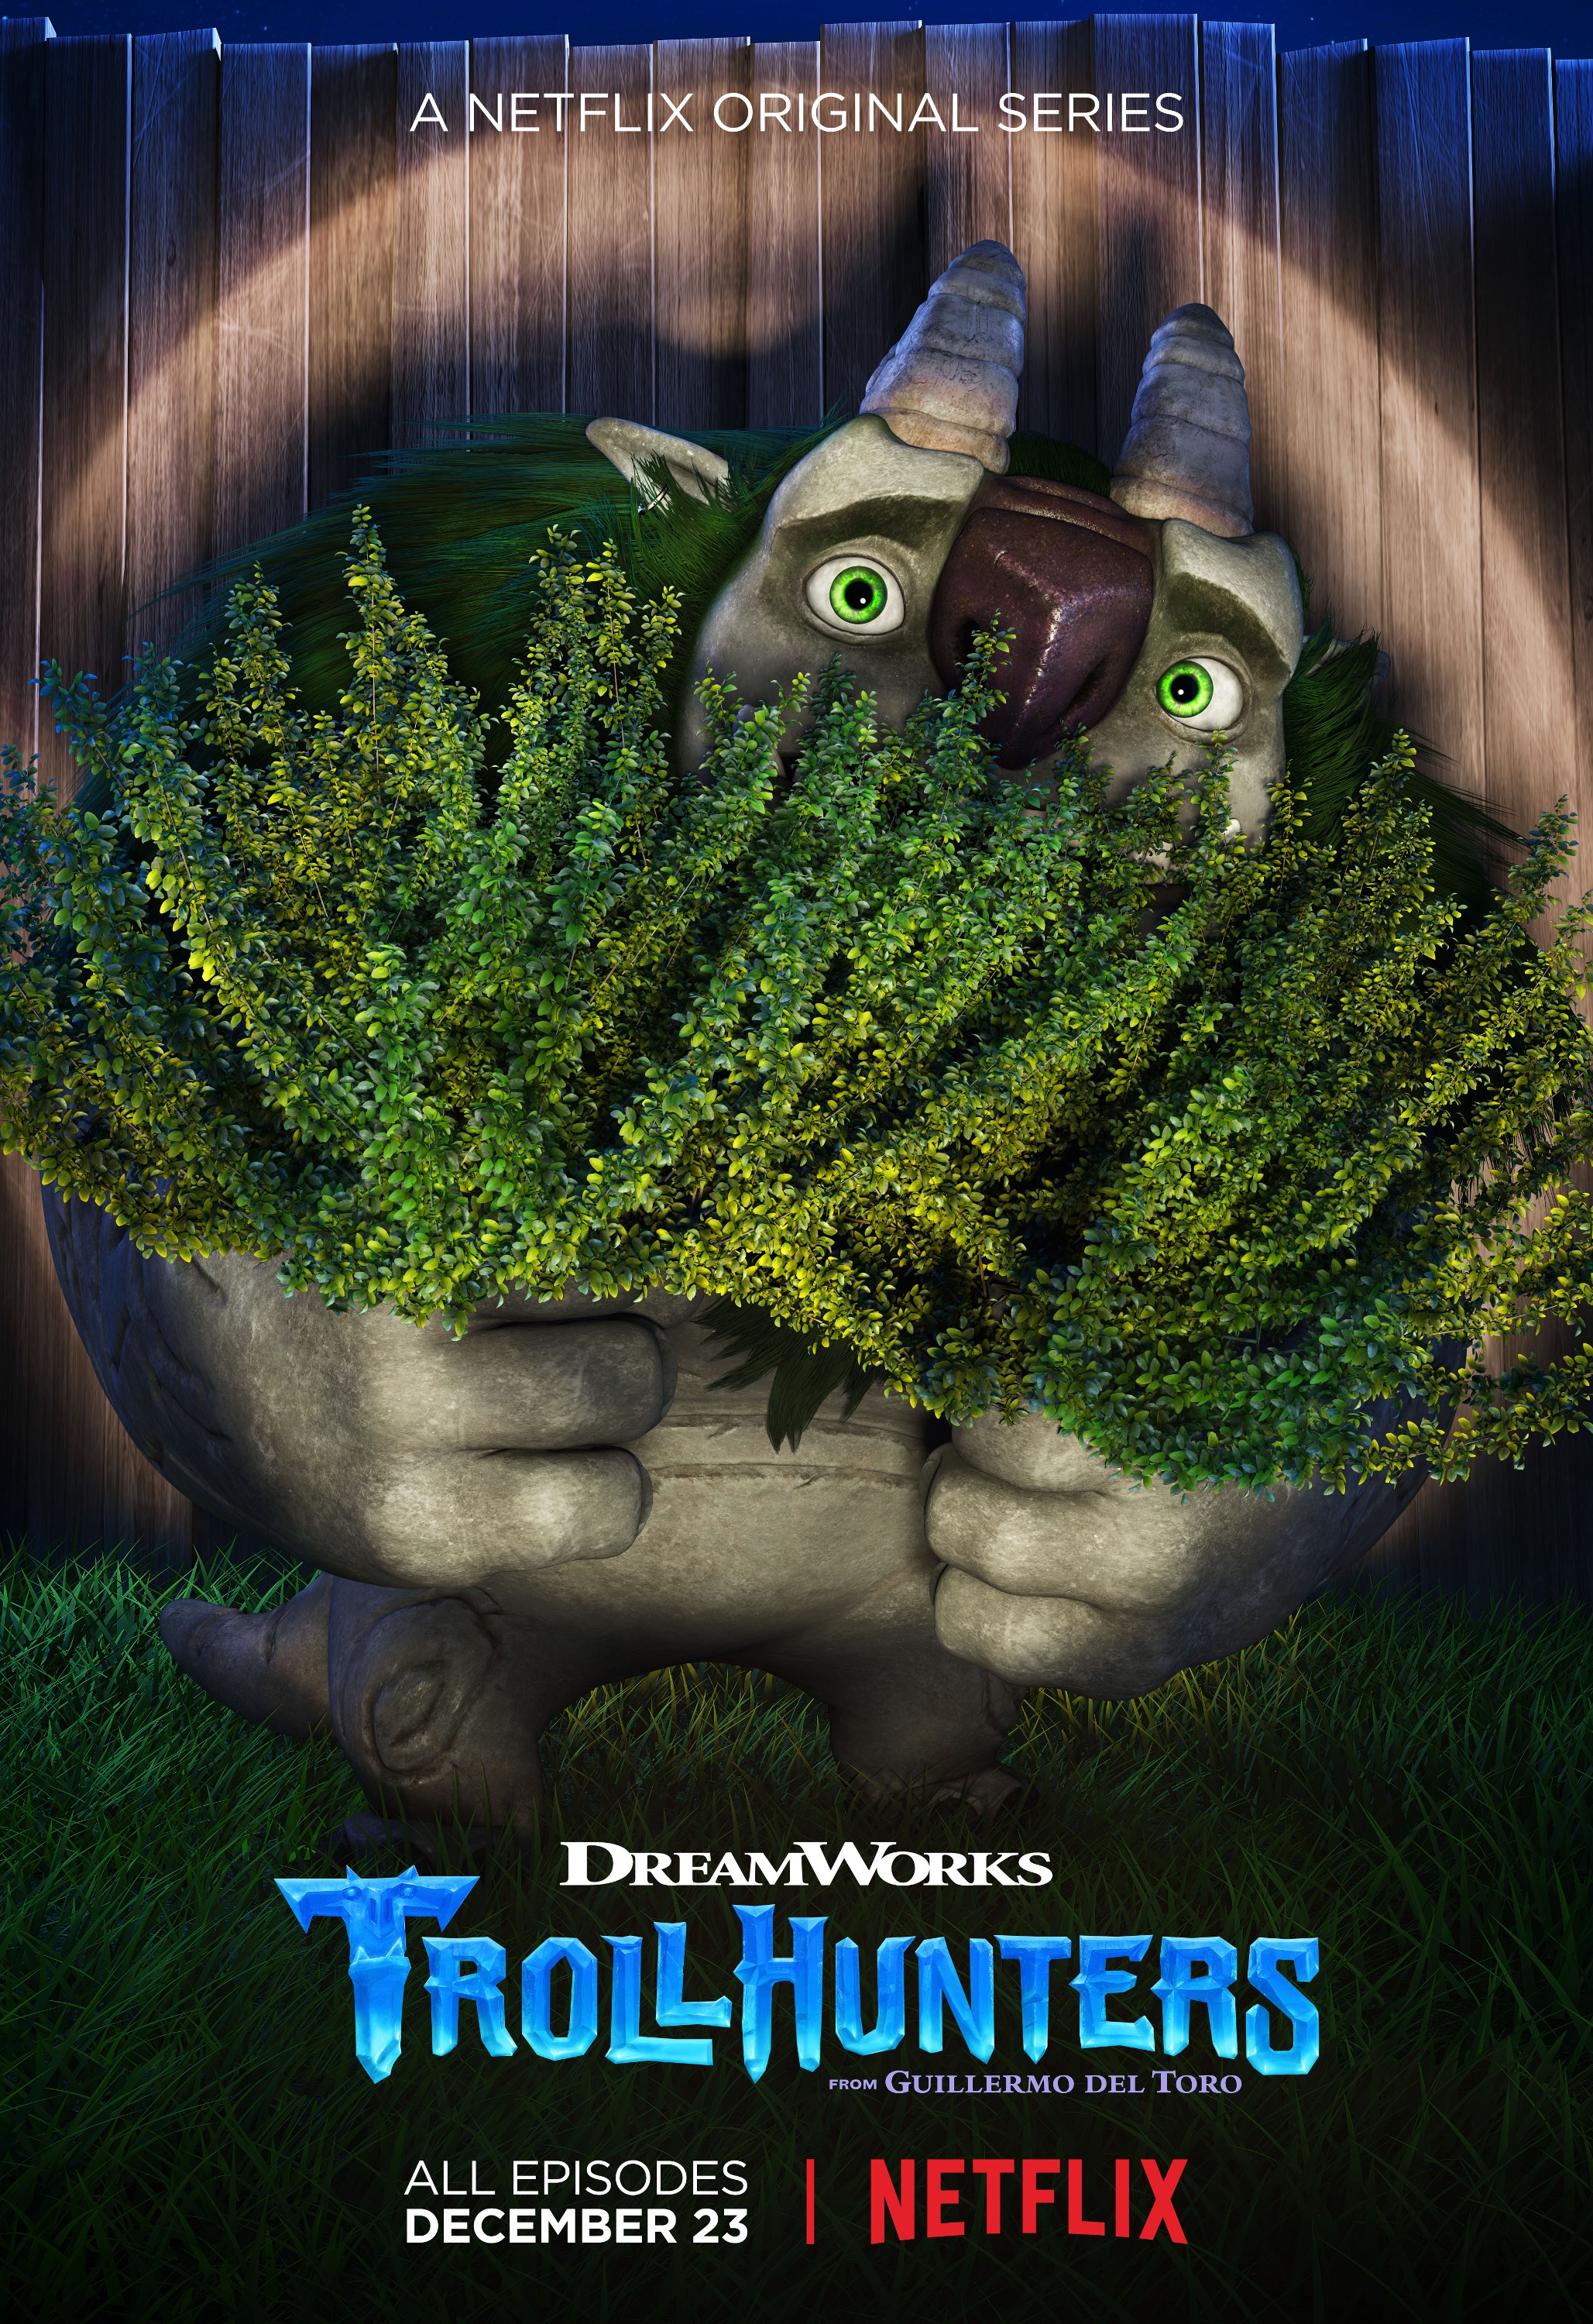 Mega Sized TV Poster Image for Trollhunters (#6 of 20)